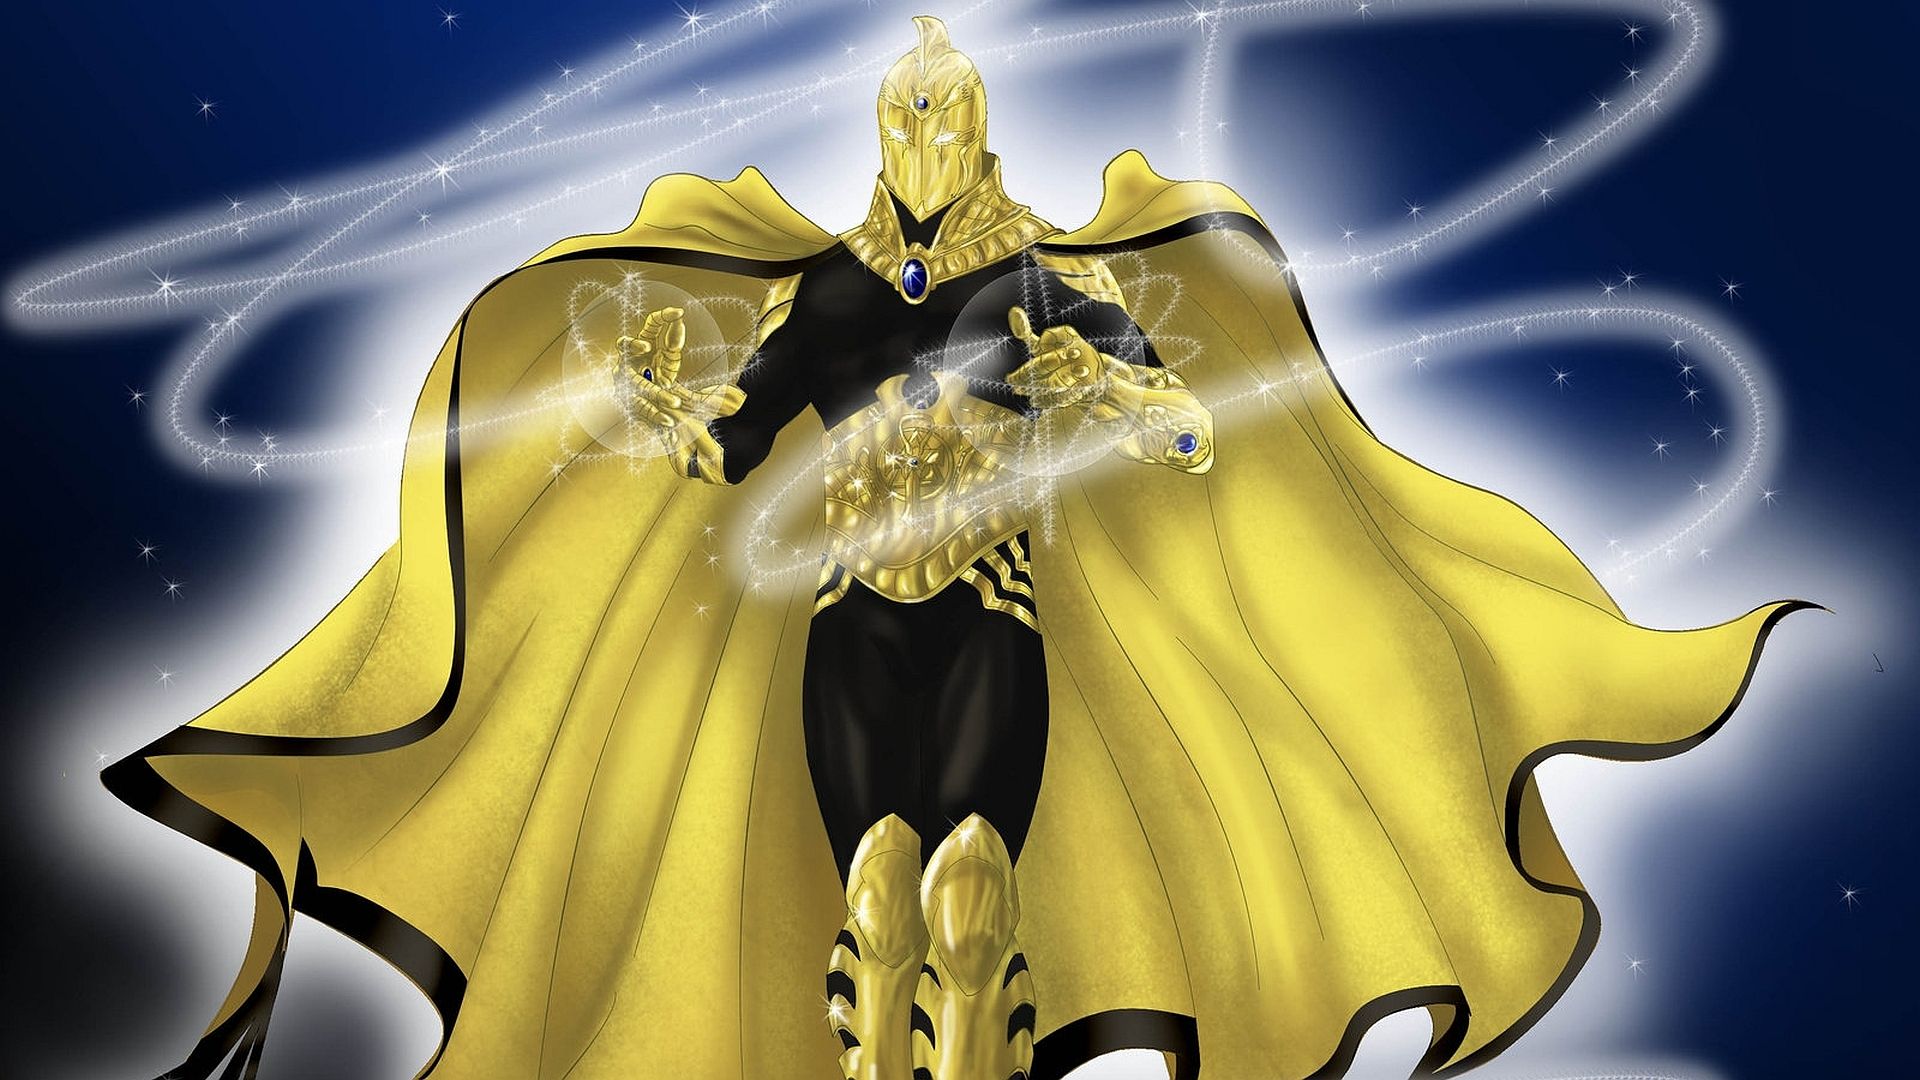 Doctor Fate Wallpaper. Fate Stay Night Wallpaper, Twisted Fate Wallpaper and Dr. Fate Wallpaper